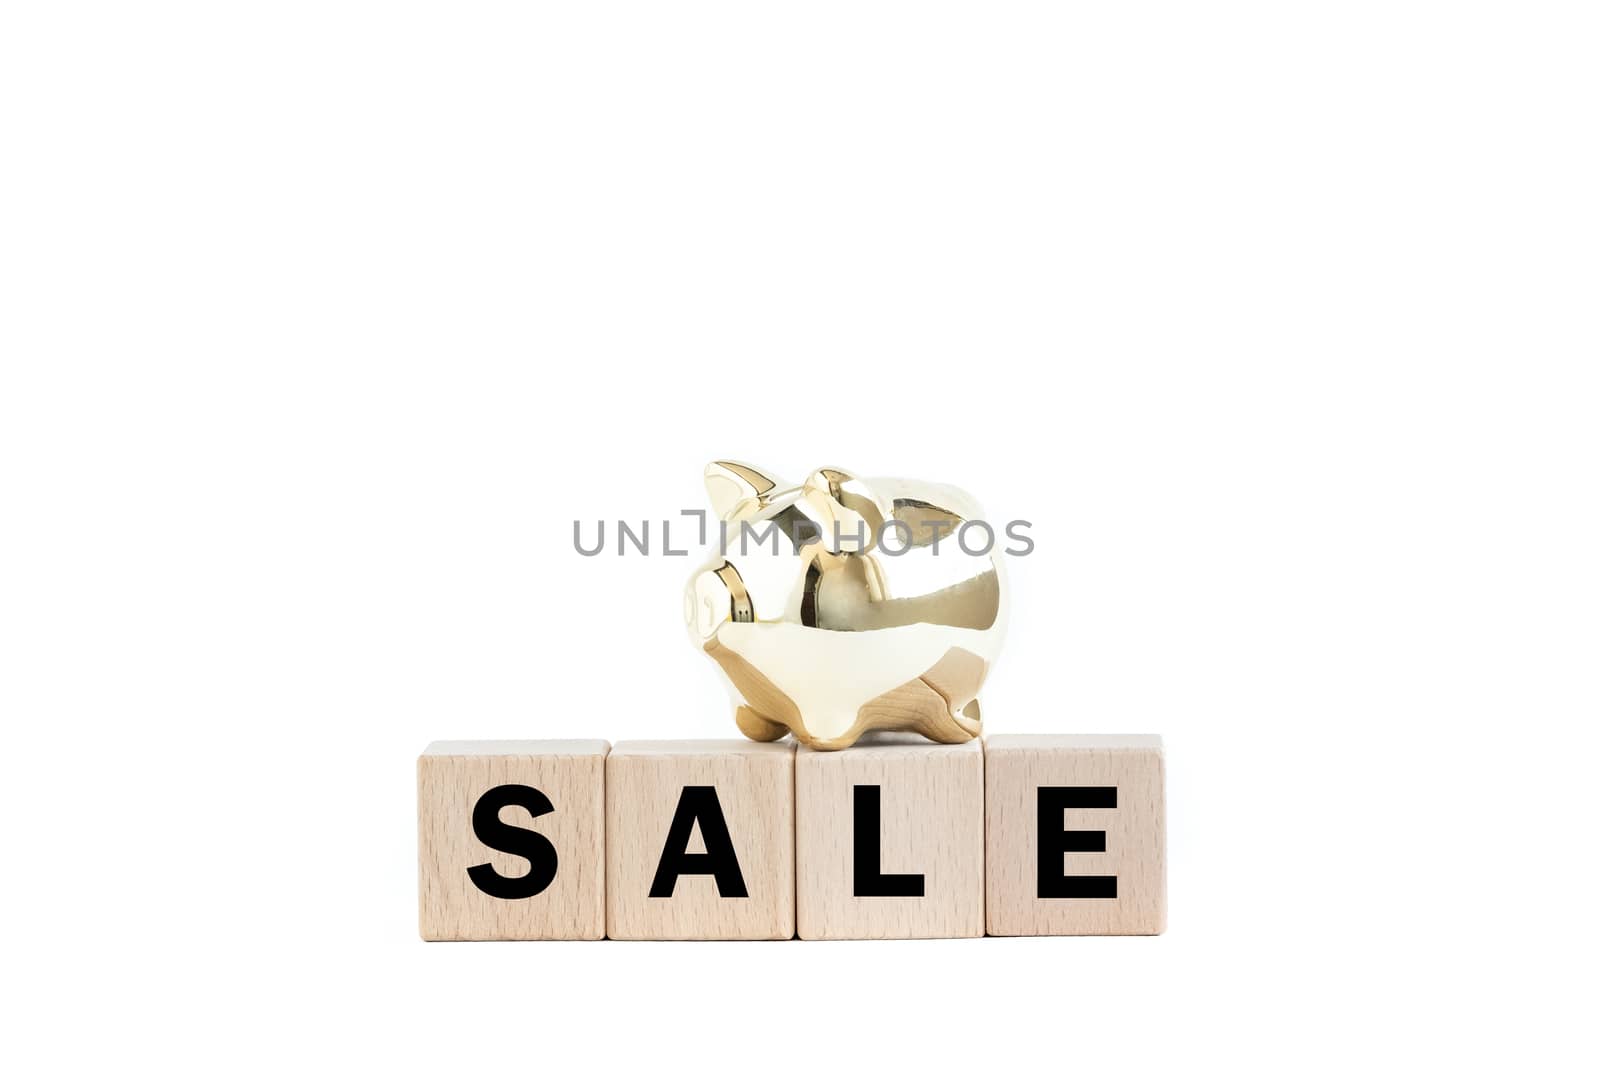 A gold piggy bank and wooden blocks with text. Isolated on white background. Sale concept.